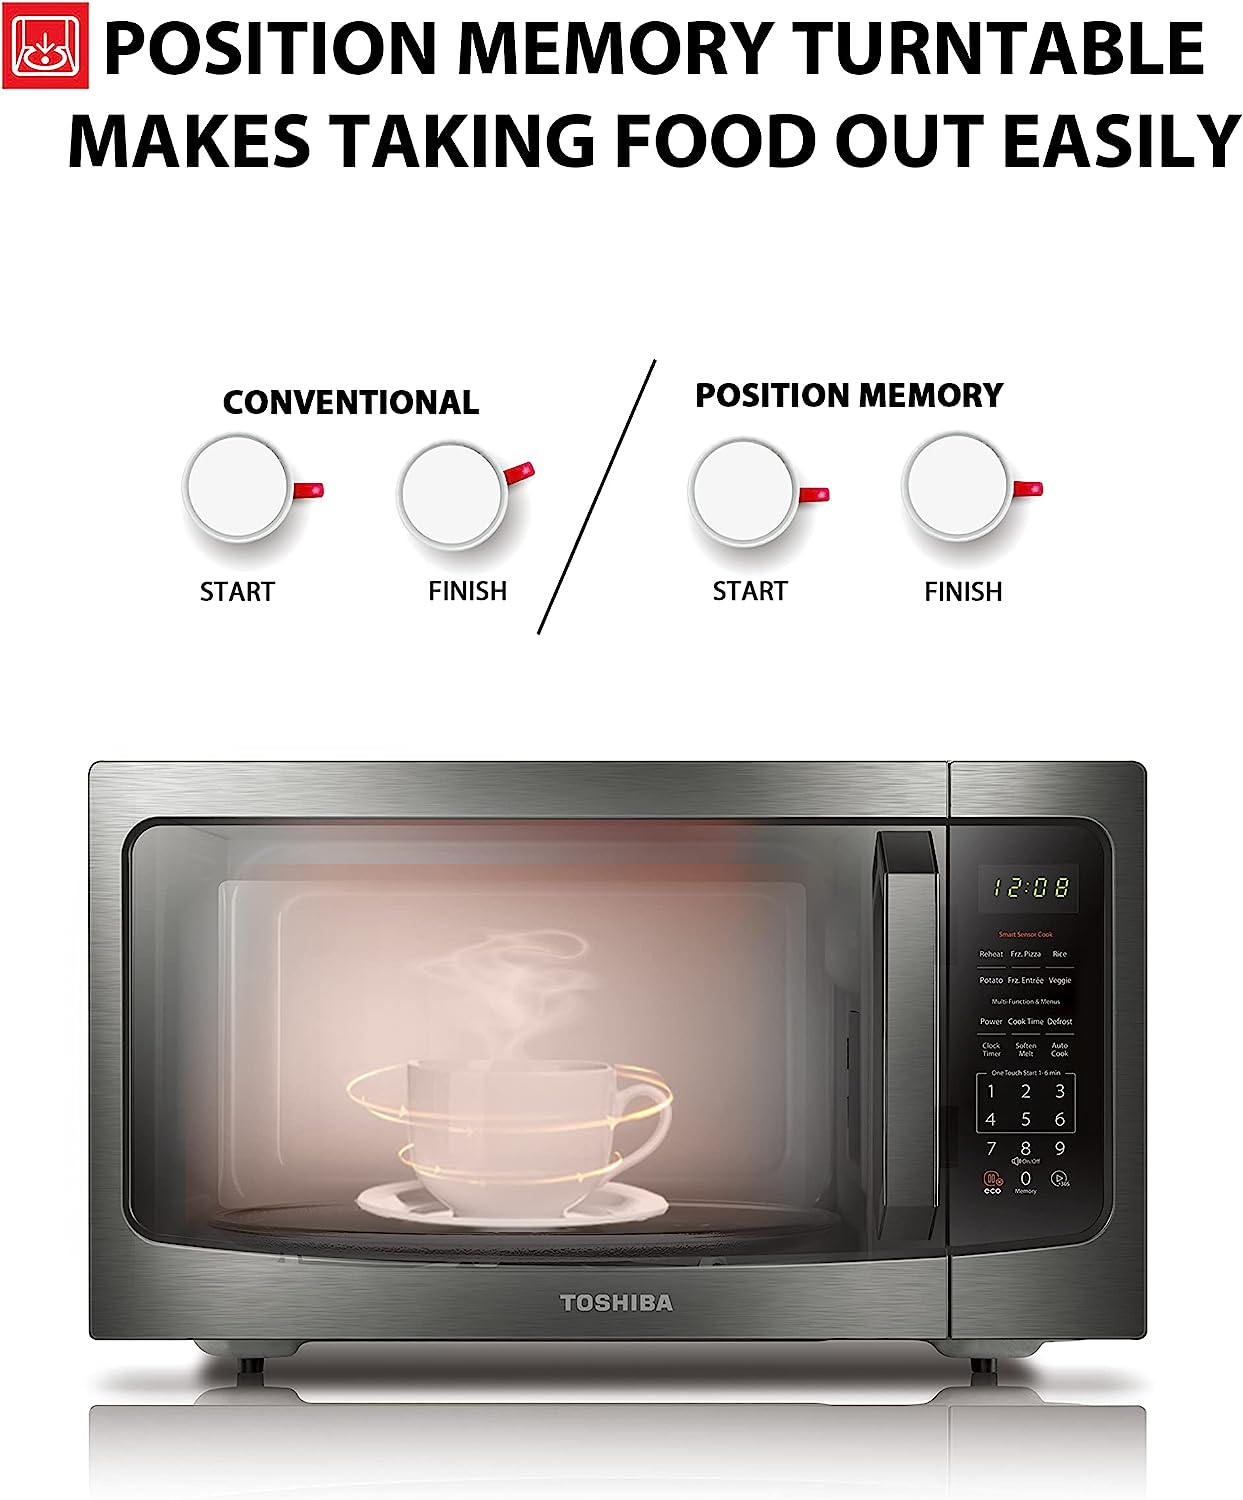 https://bigbigmart.com/wp-content/uploads/2023/07/TOSHIBA-ML-EM45PBS-Countertop-Microwave-Oven-with-Smart-Sensor-and-Position-Memory-Turntable-Memory-Function-1.6-Cu.ft-with-13.6-Removable-Turntable-Black-Stainless-Steel-1200W4.jpg